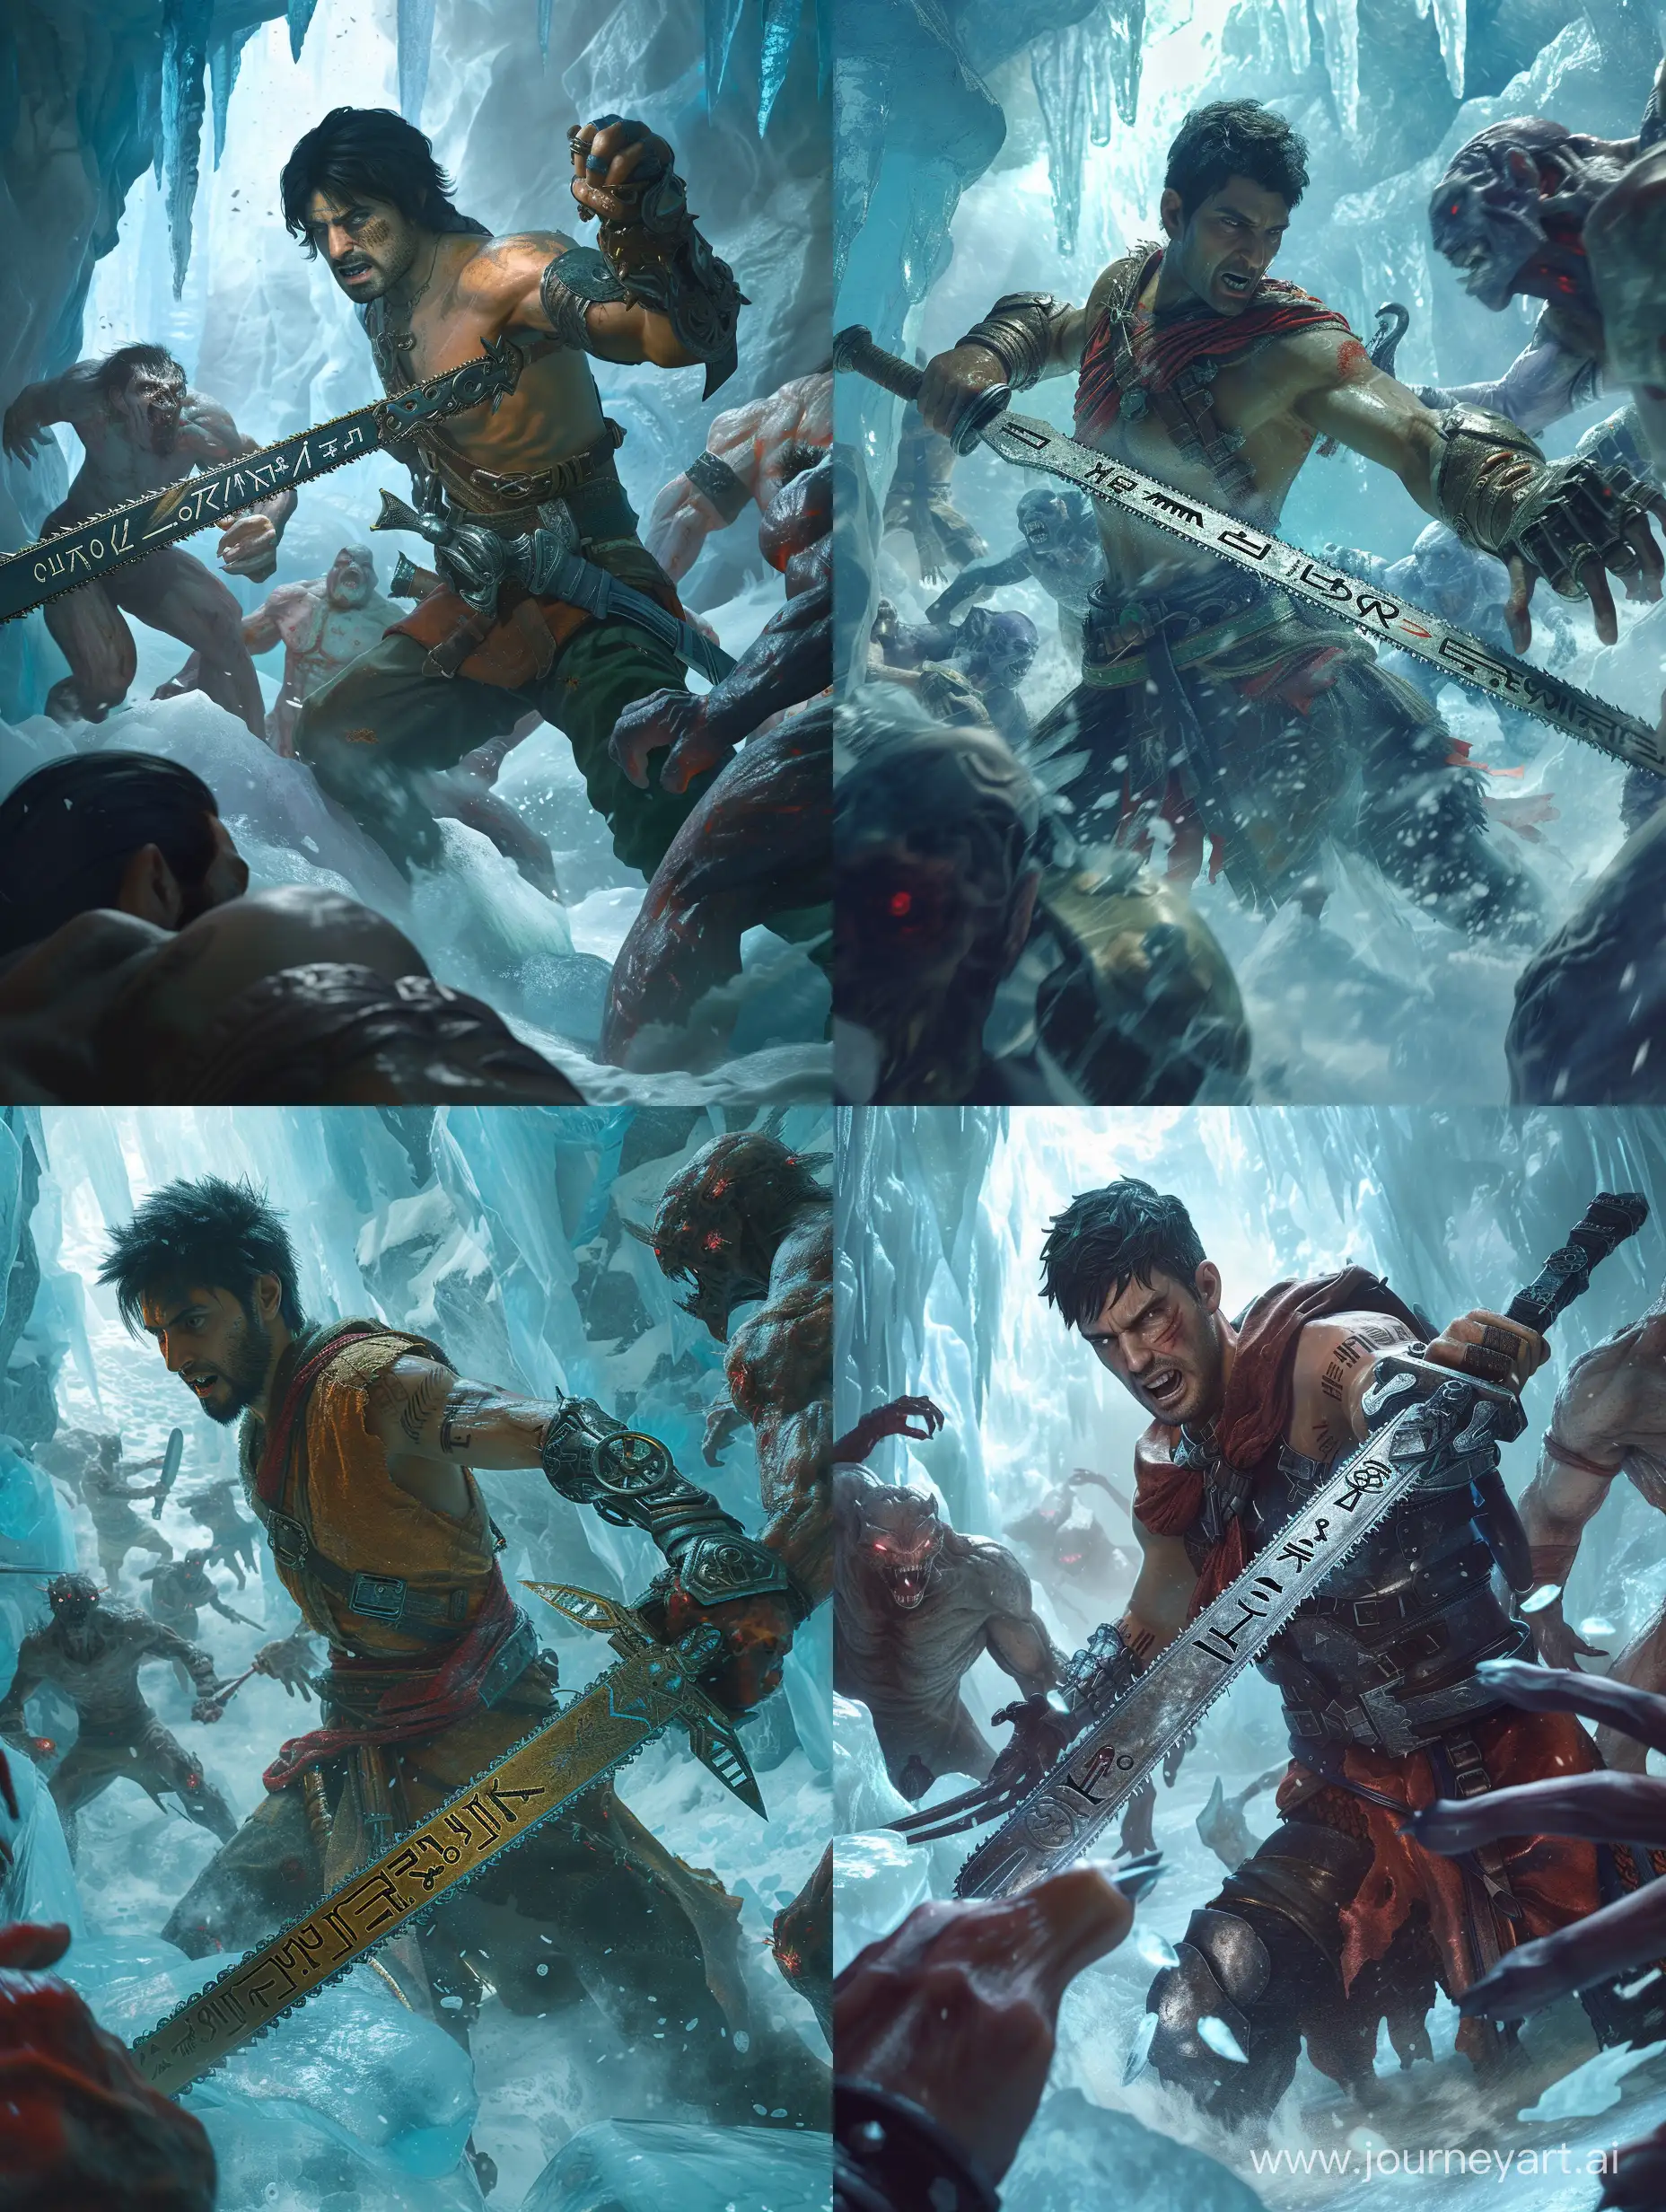 persian man[25 years old,handsome]with sword [chainsaw blades,cuneiform letters curving on it]and right hand mechanical armglove[powerful,intricate],fighting with Ice creatures[humanoid,angry, attacking],in an ice cave,incredible detail,Steampunk,Digital Art,Fantasy Art,Unreal engine 5.